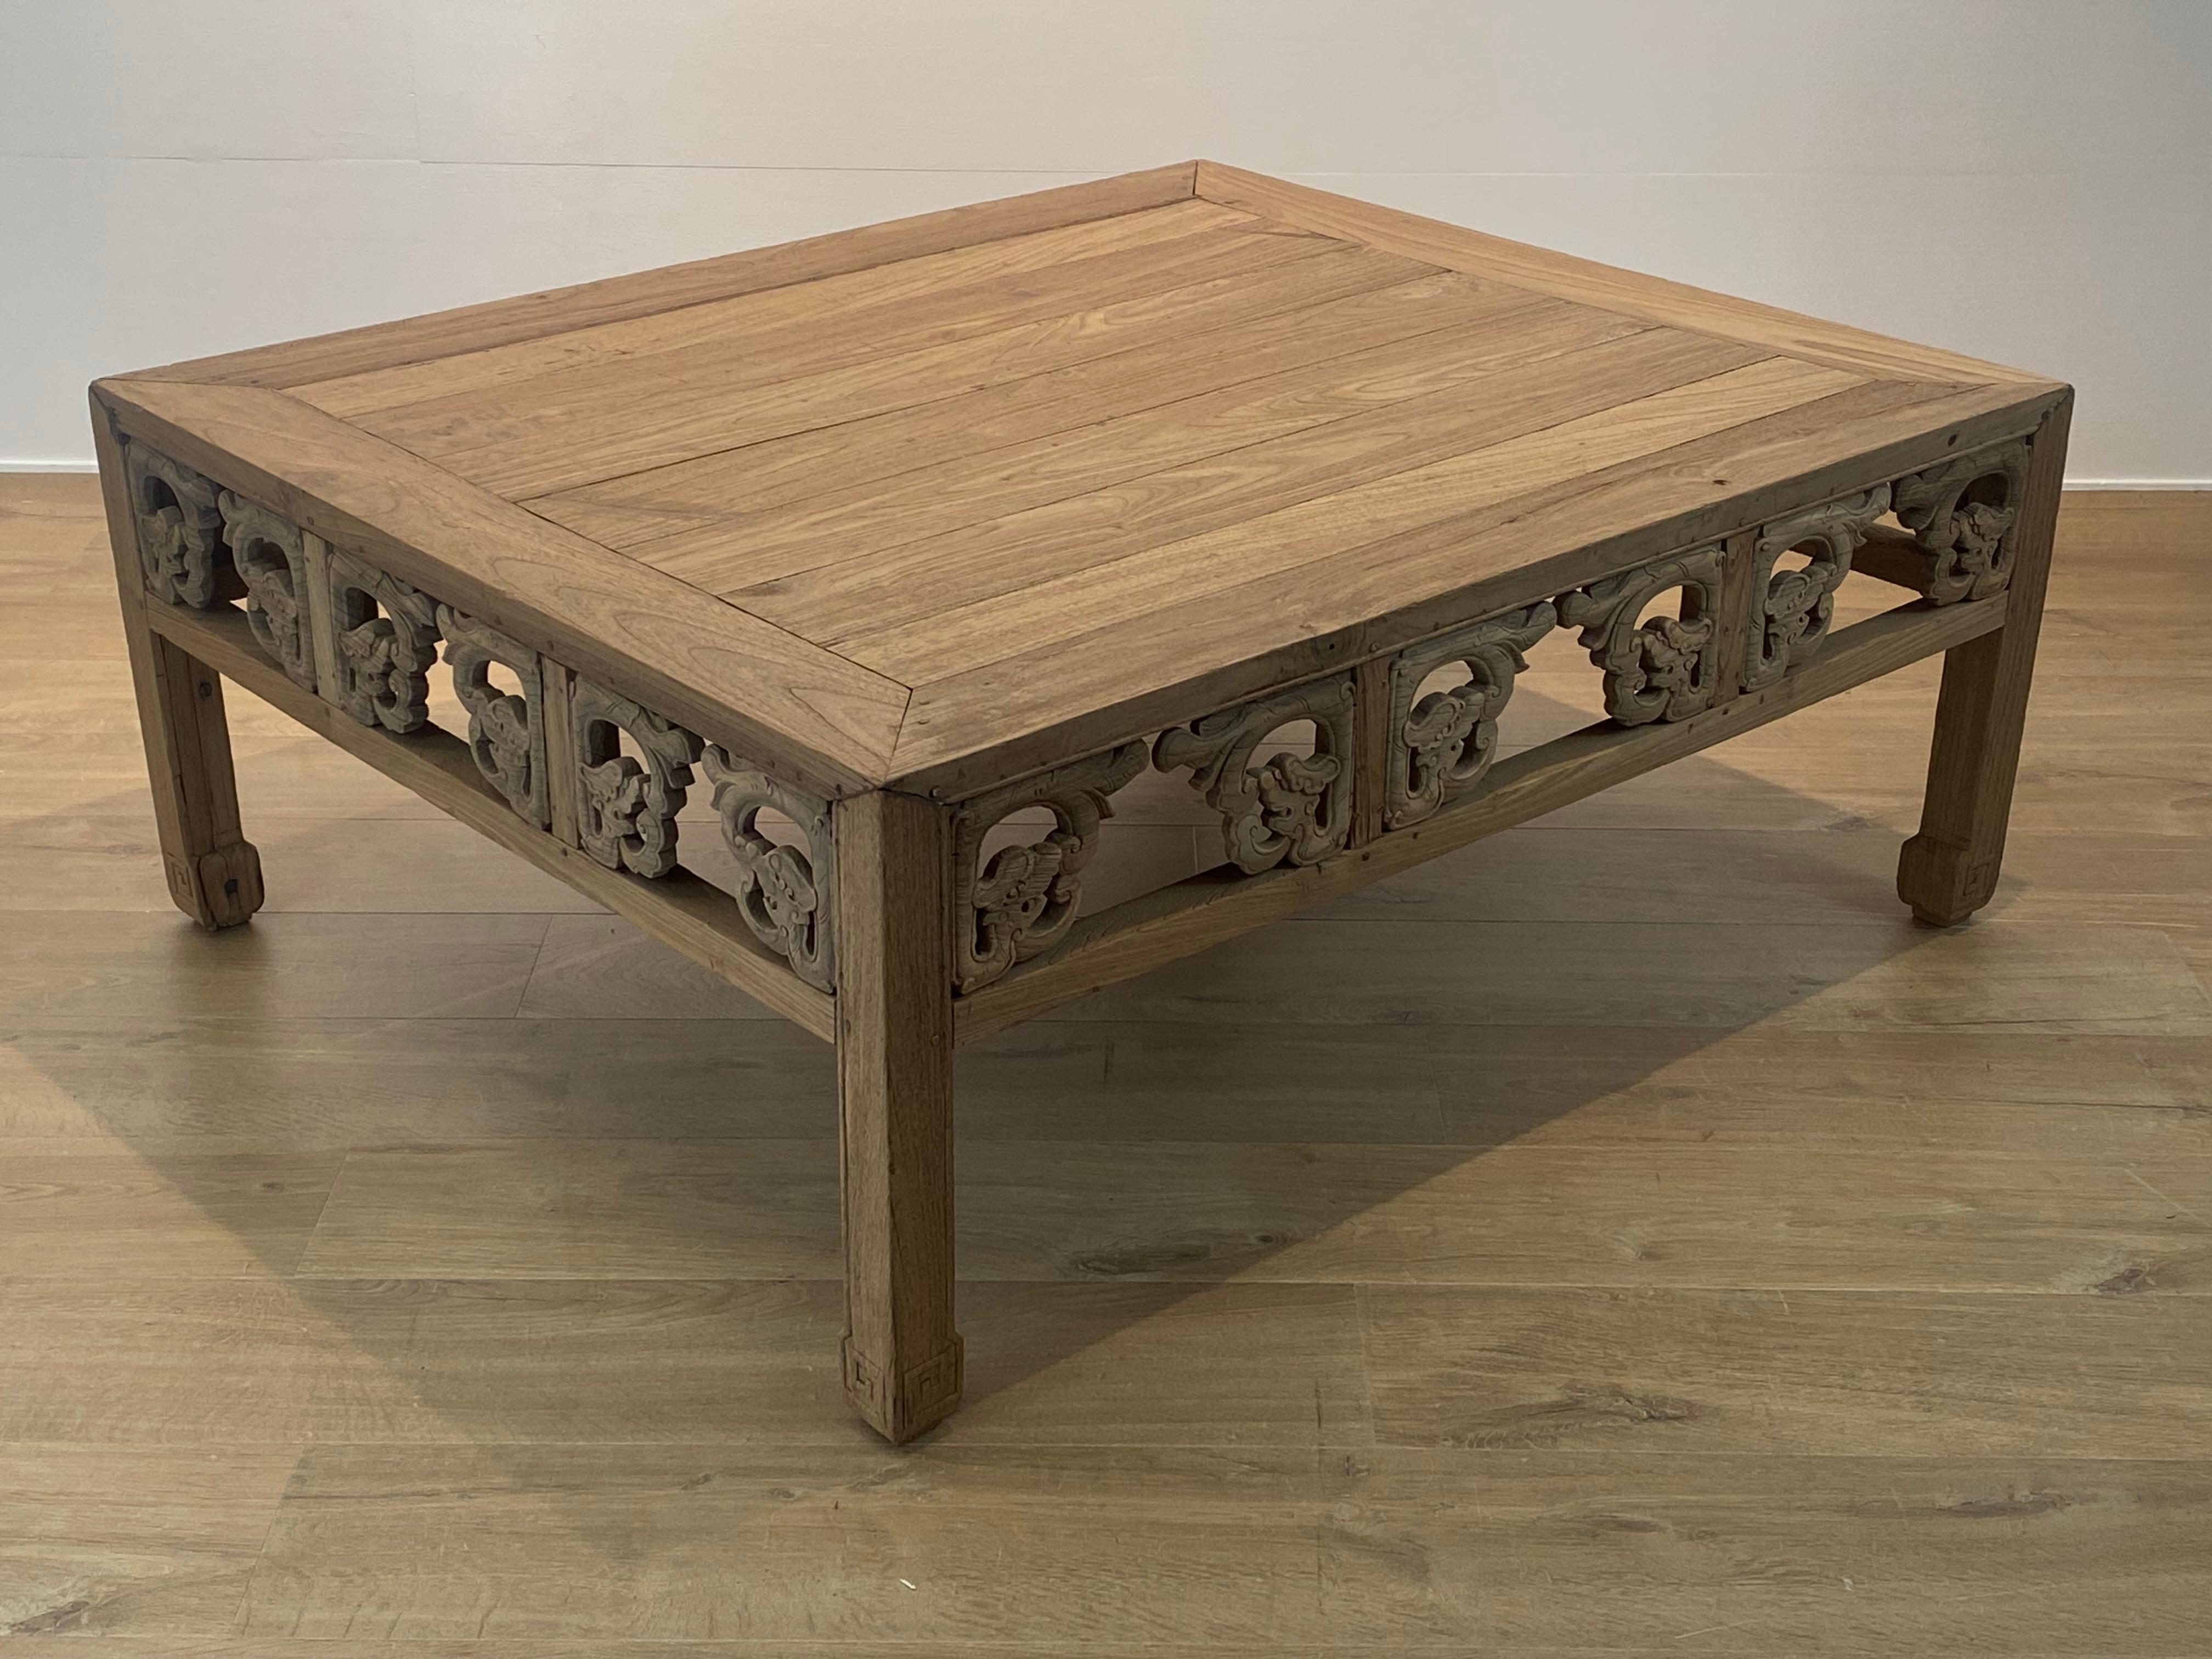 Exceptional and unique Sofa Table from Asia,
made of bleached Elm Wood,Central China from around 1920,
the table has a very warm and beautiful color and patina,
Oriental and refined design of the table,
good dimensions and to be placed in different